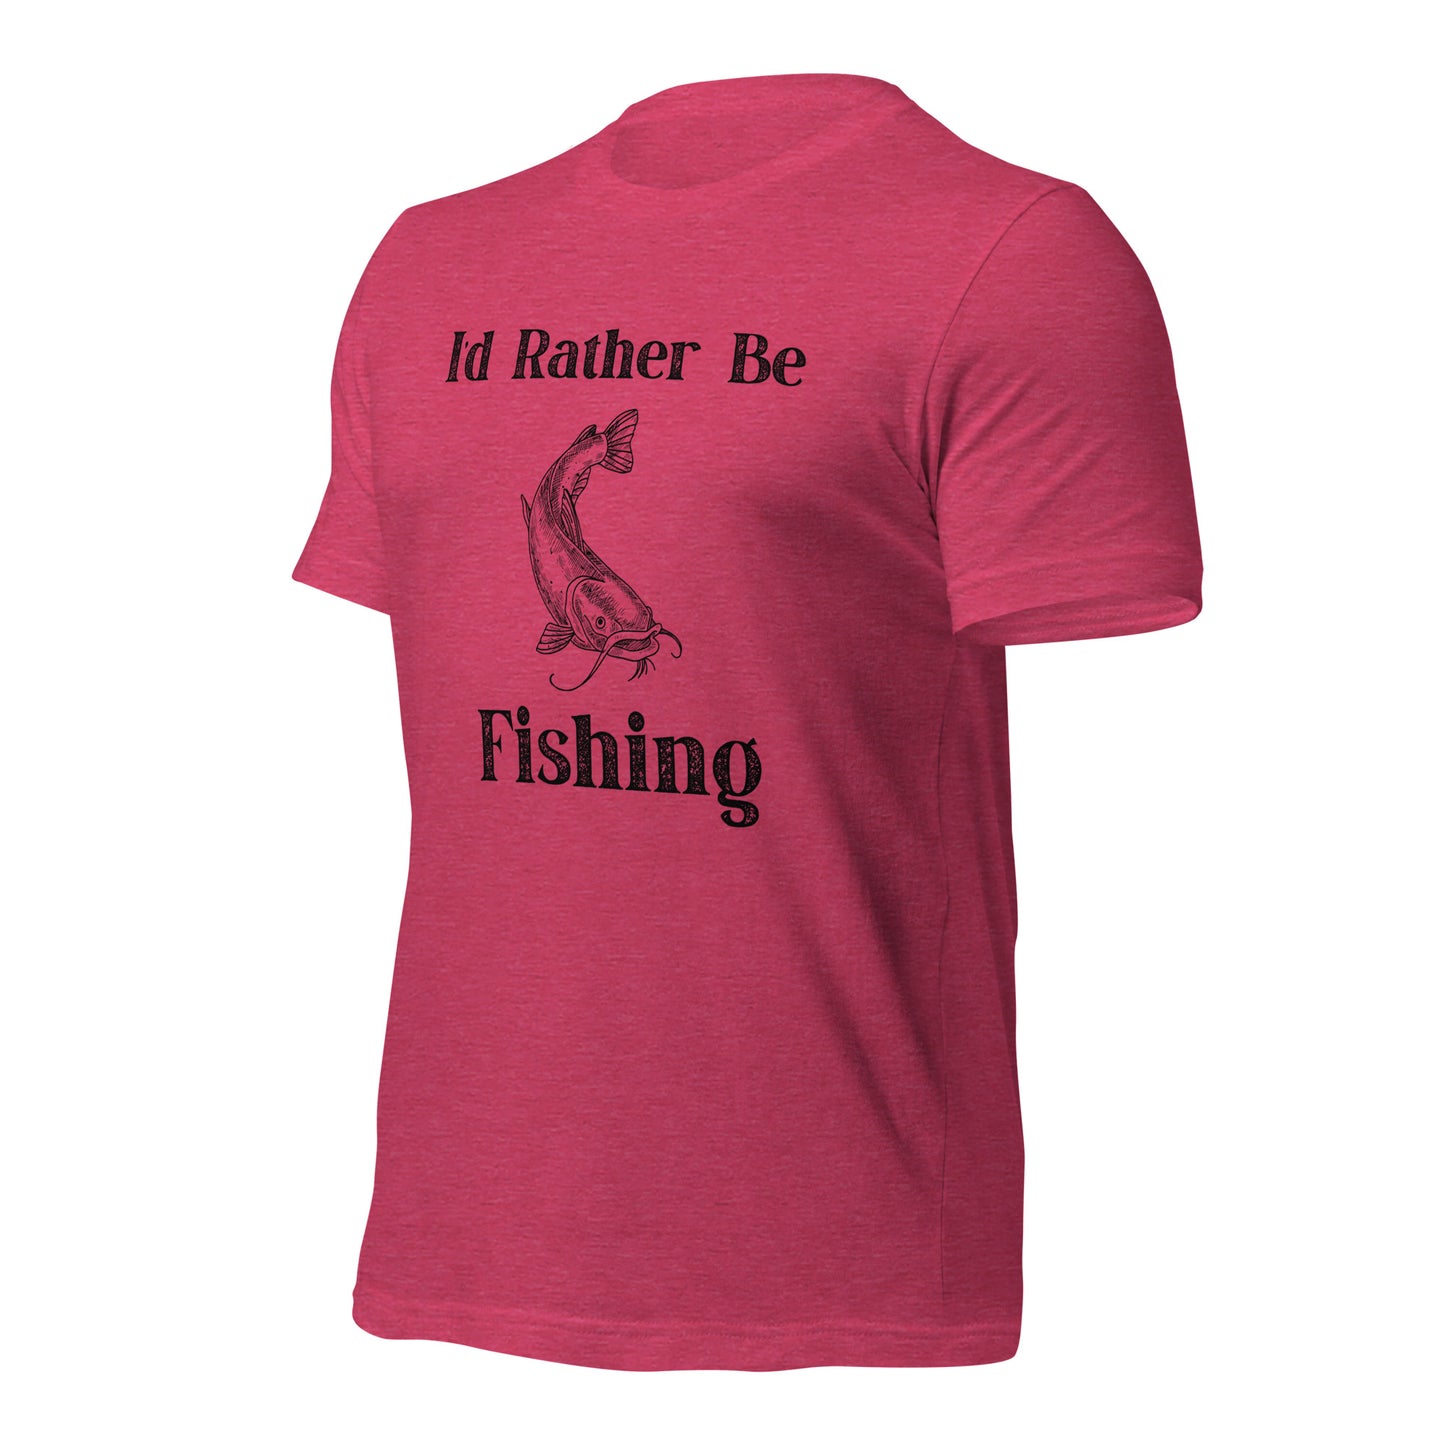 Comfortable fishing-themed t-shirt in high-quality cotton.